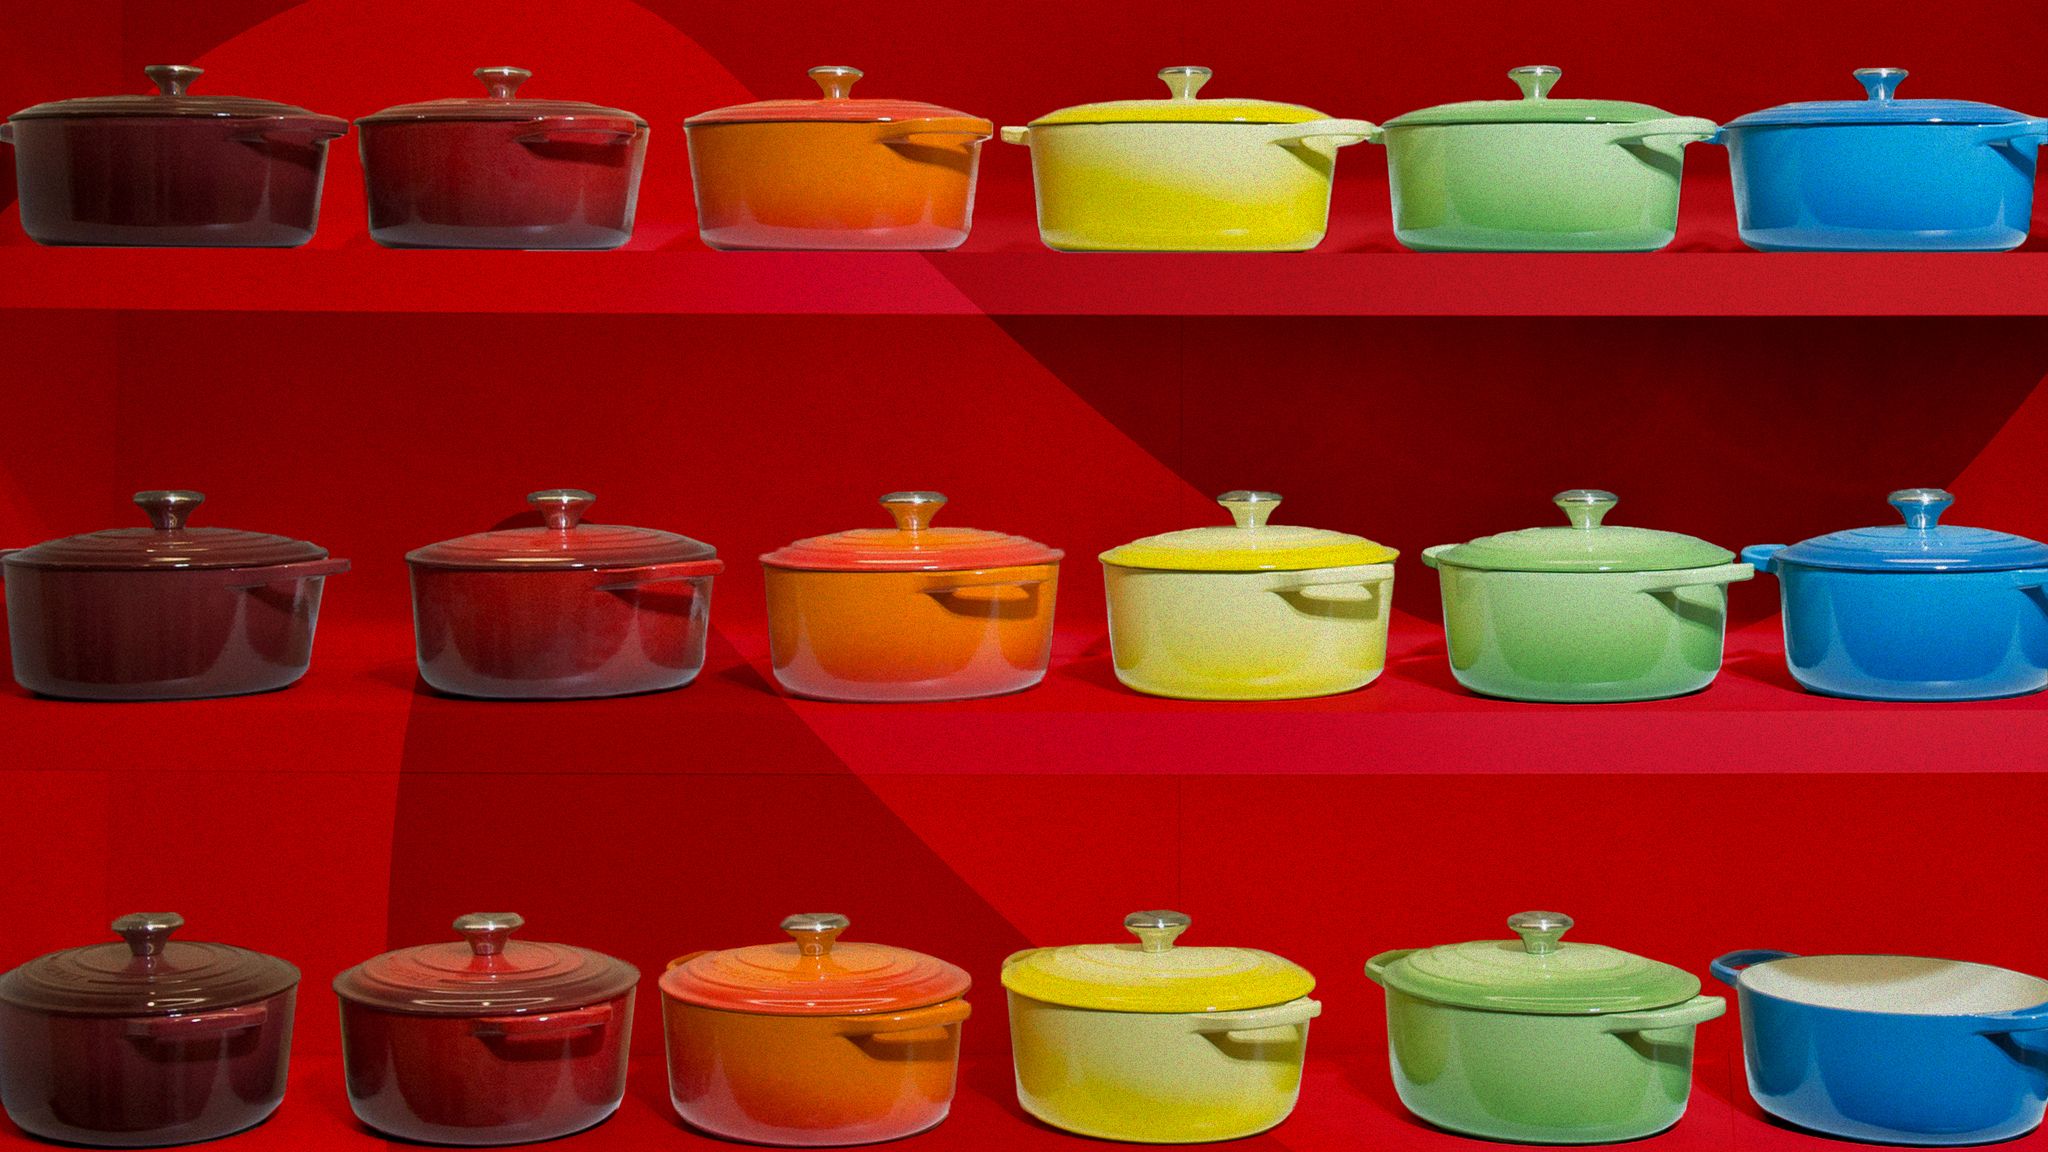 Le Creuset cookware on sale: Save up to $120.05